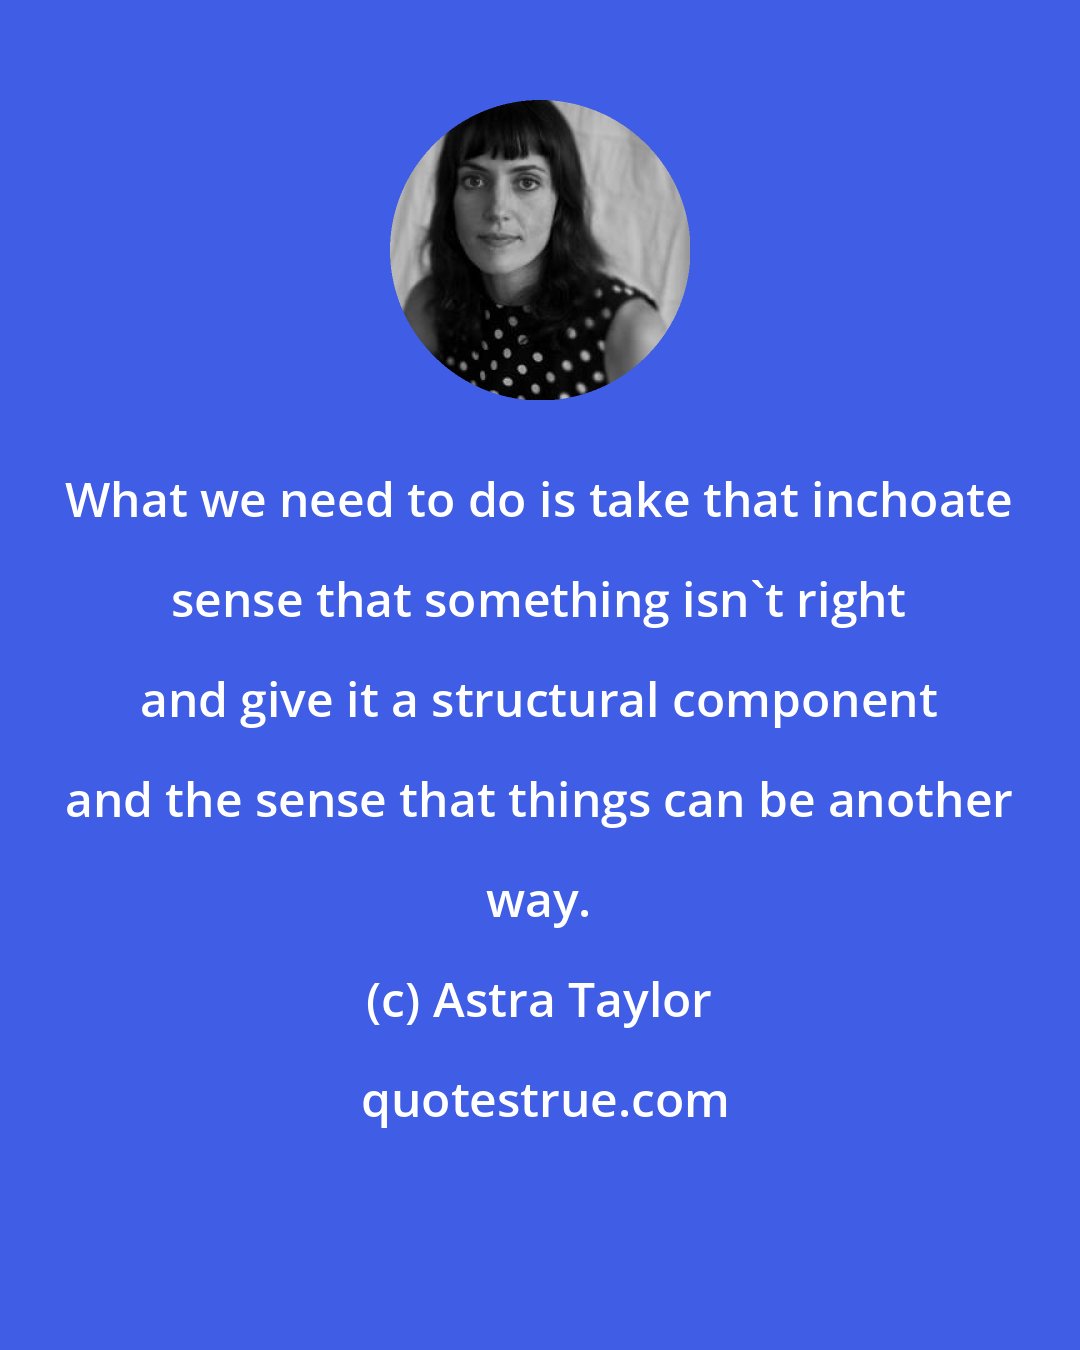 Astra Taylor: What we need to do is take that inchoate sense that something isn't right and give it a structural component and the sense that things can be another way.